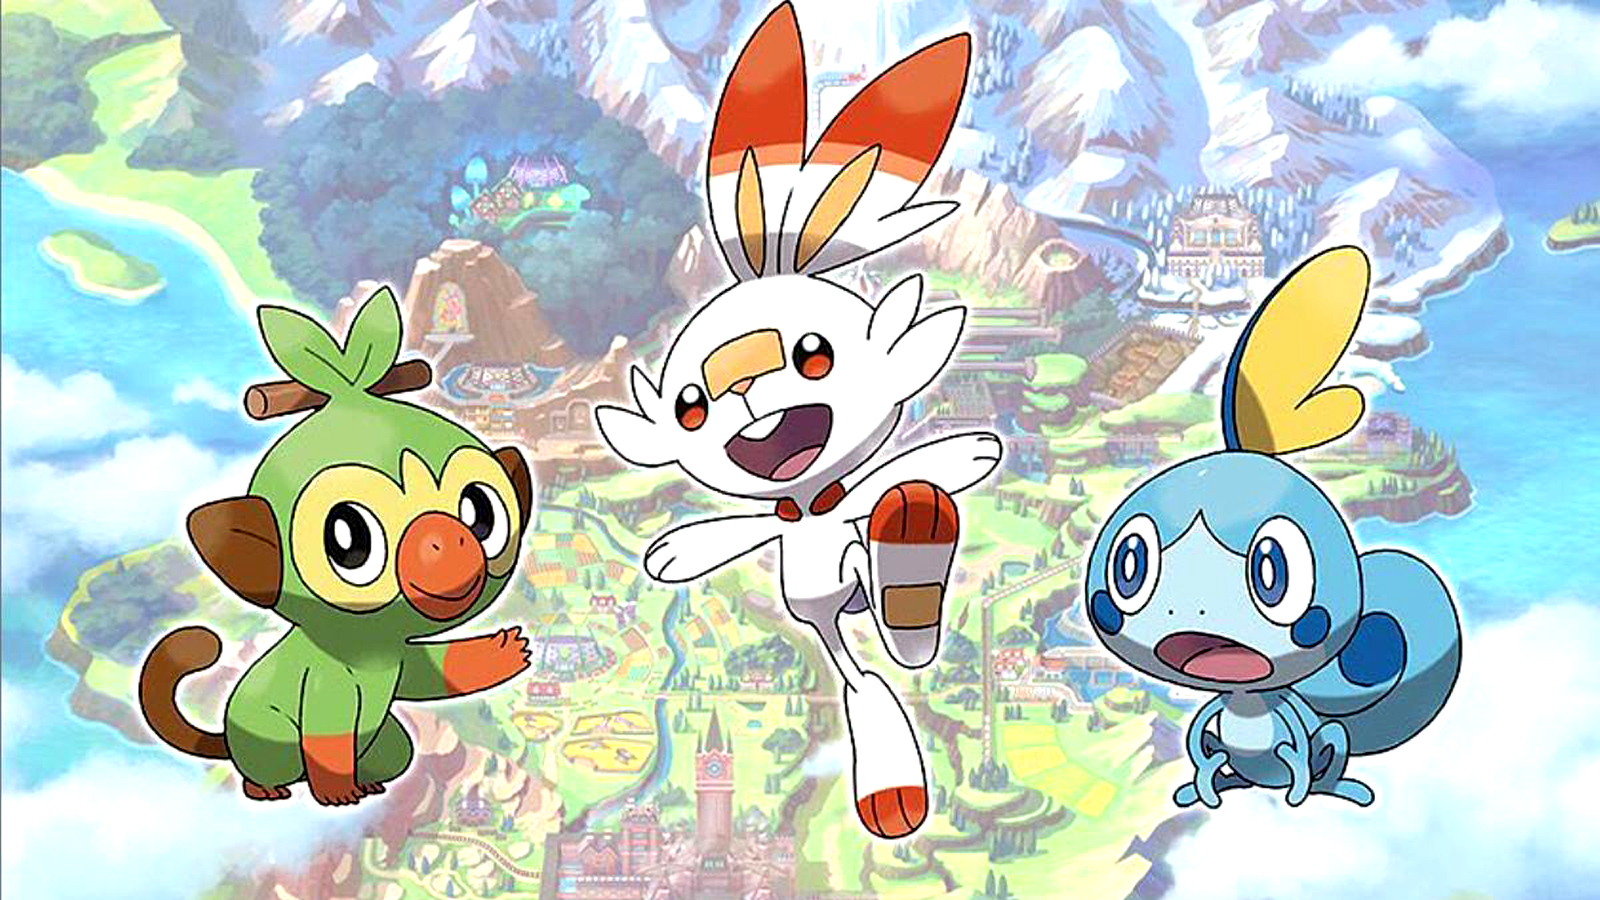 New Items And Features Officially Revealed For Pokemon Sword And